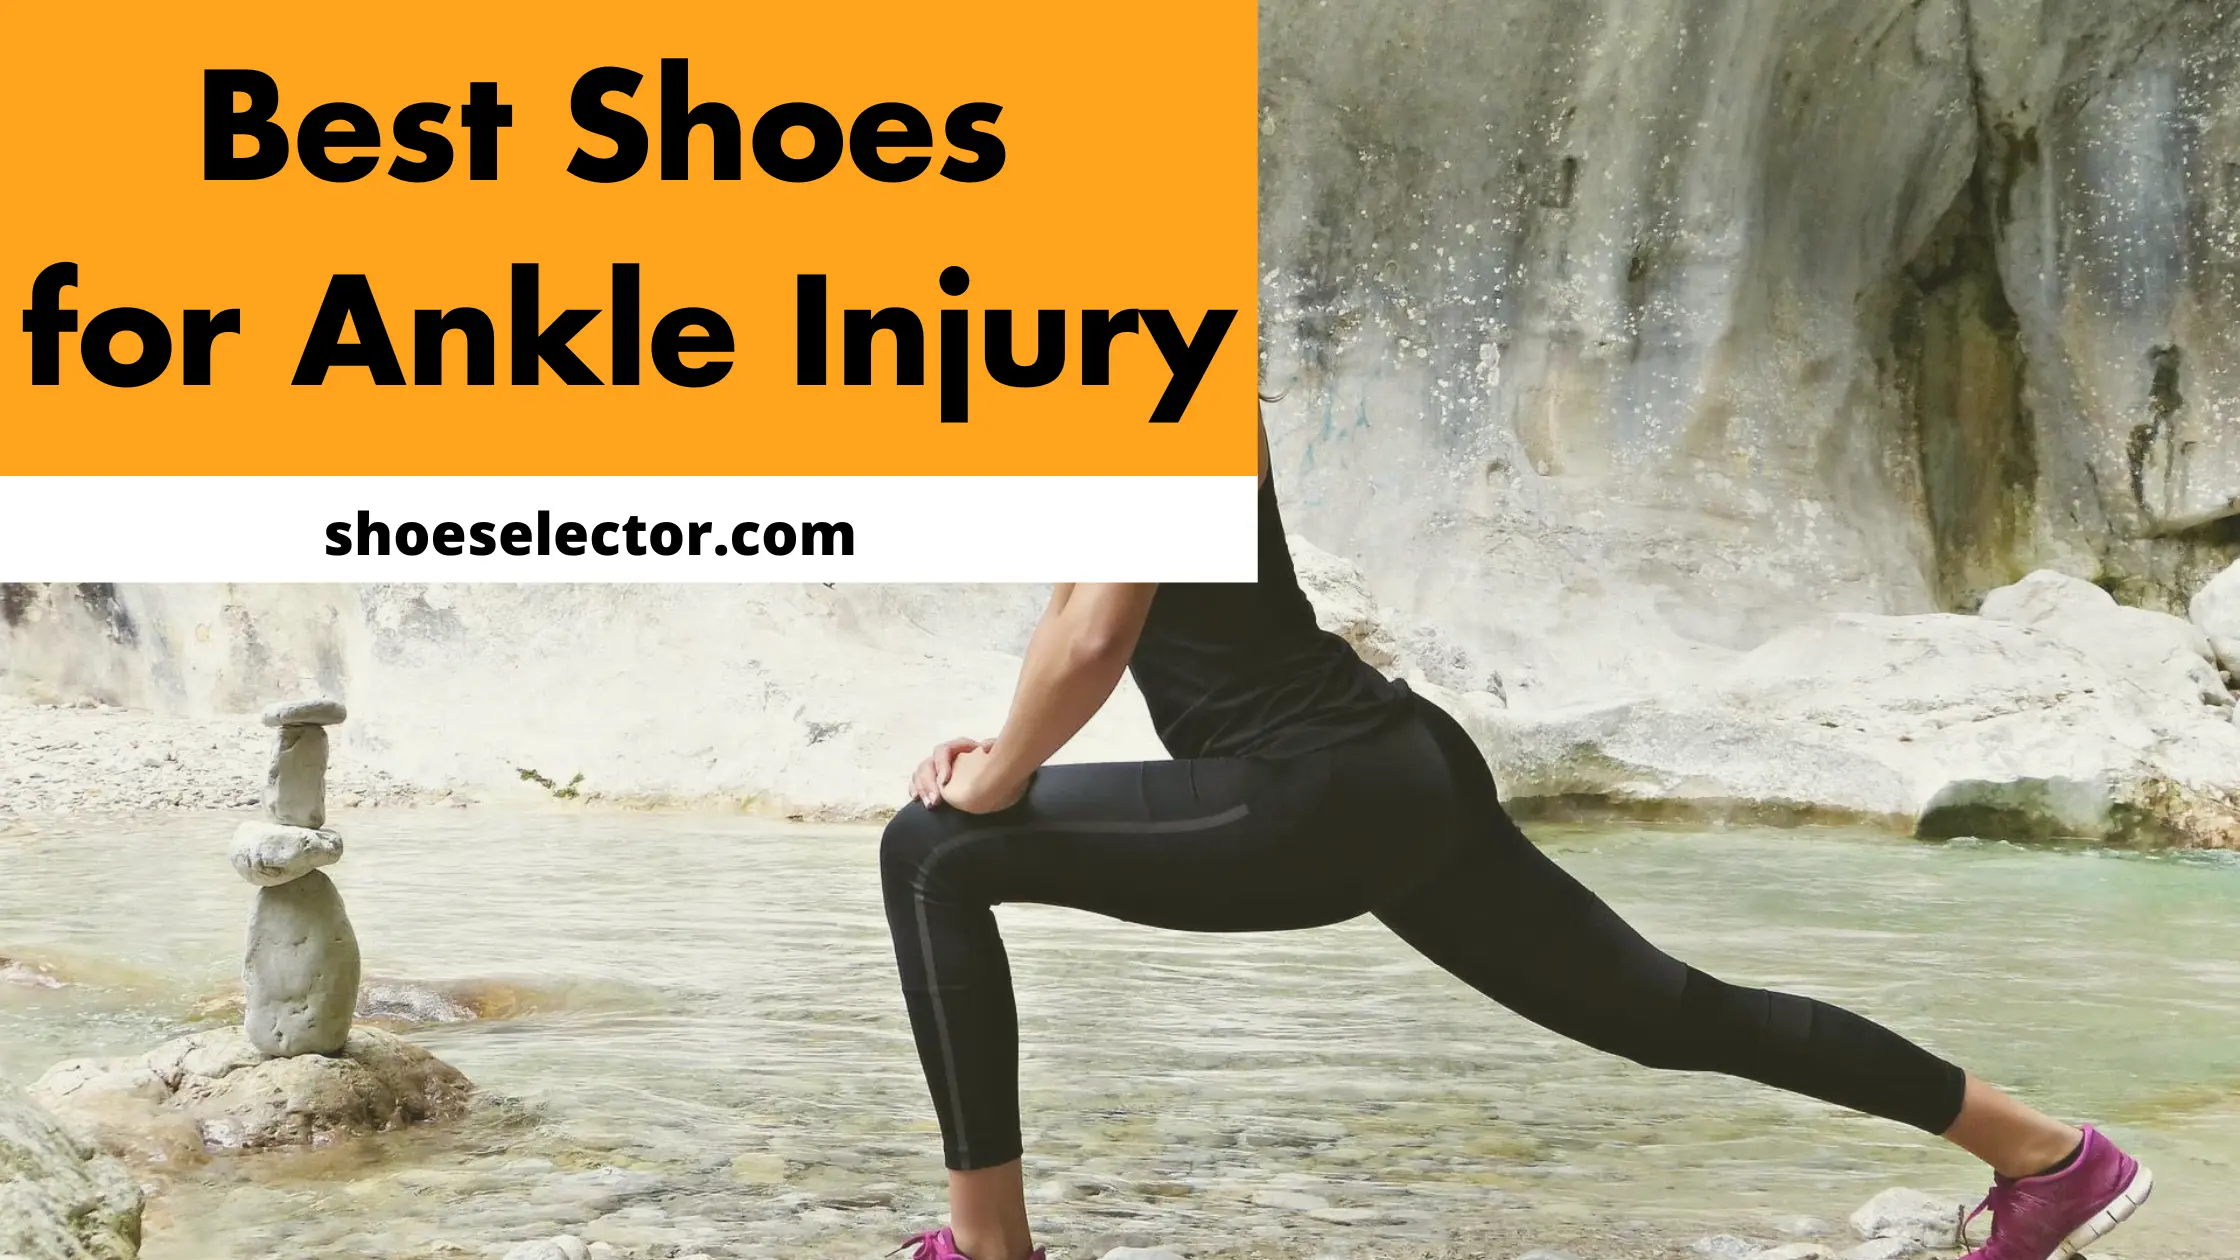 Best Shoes For Ankle Injury With Comprehensive Details